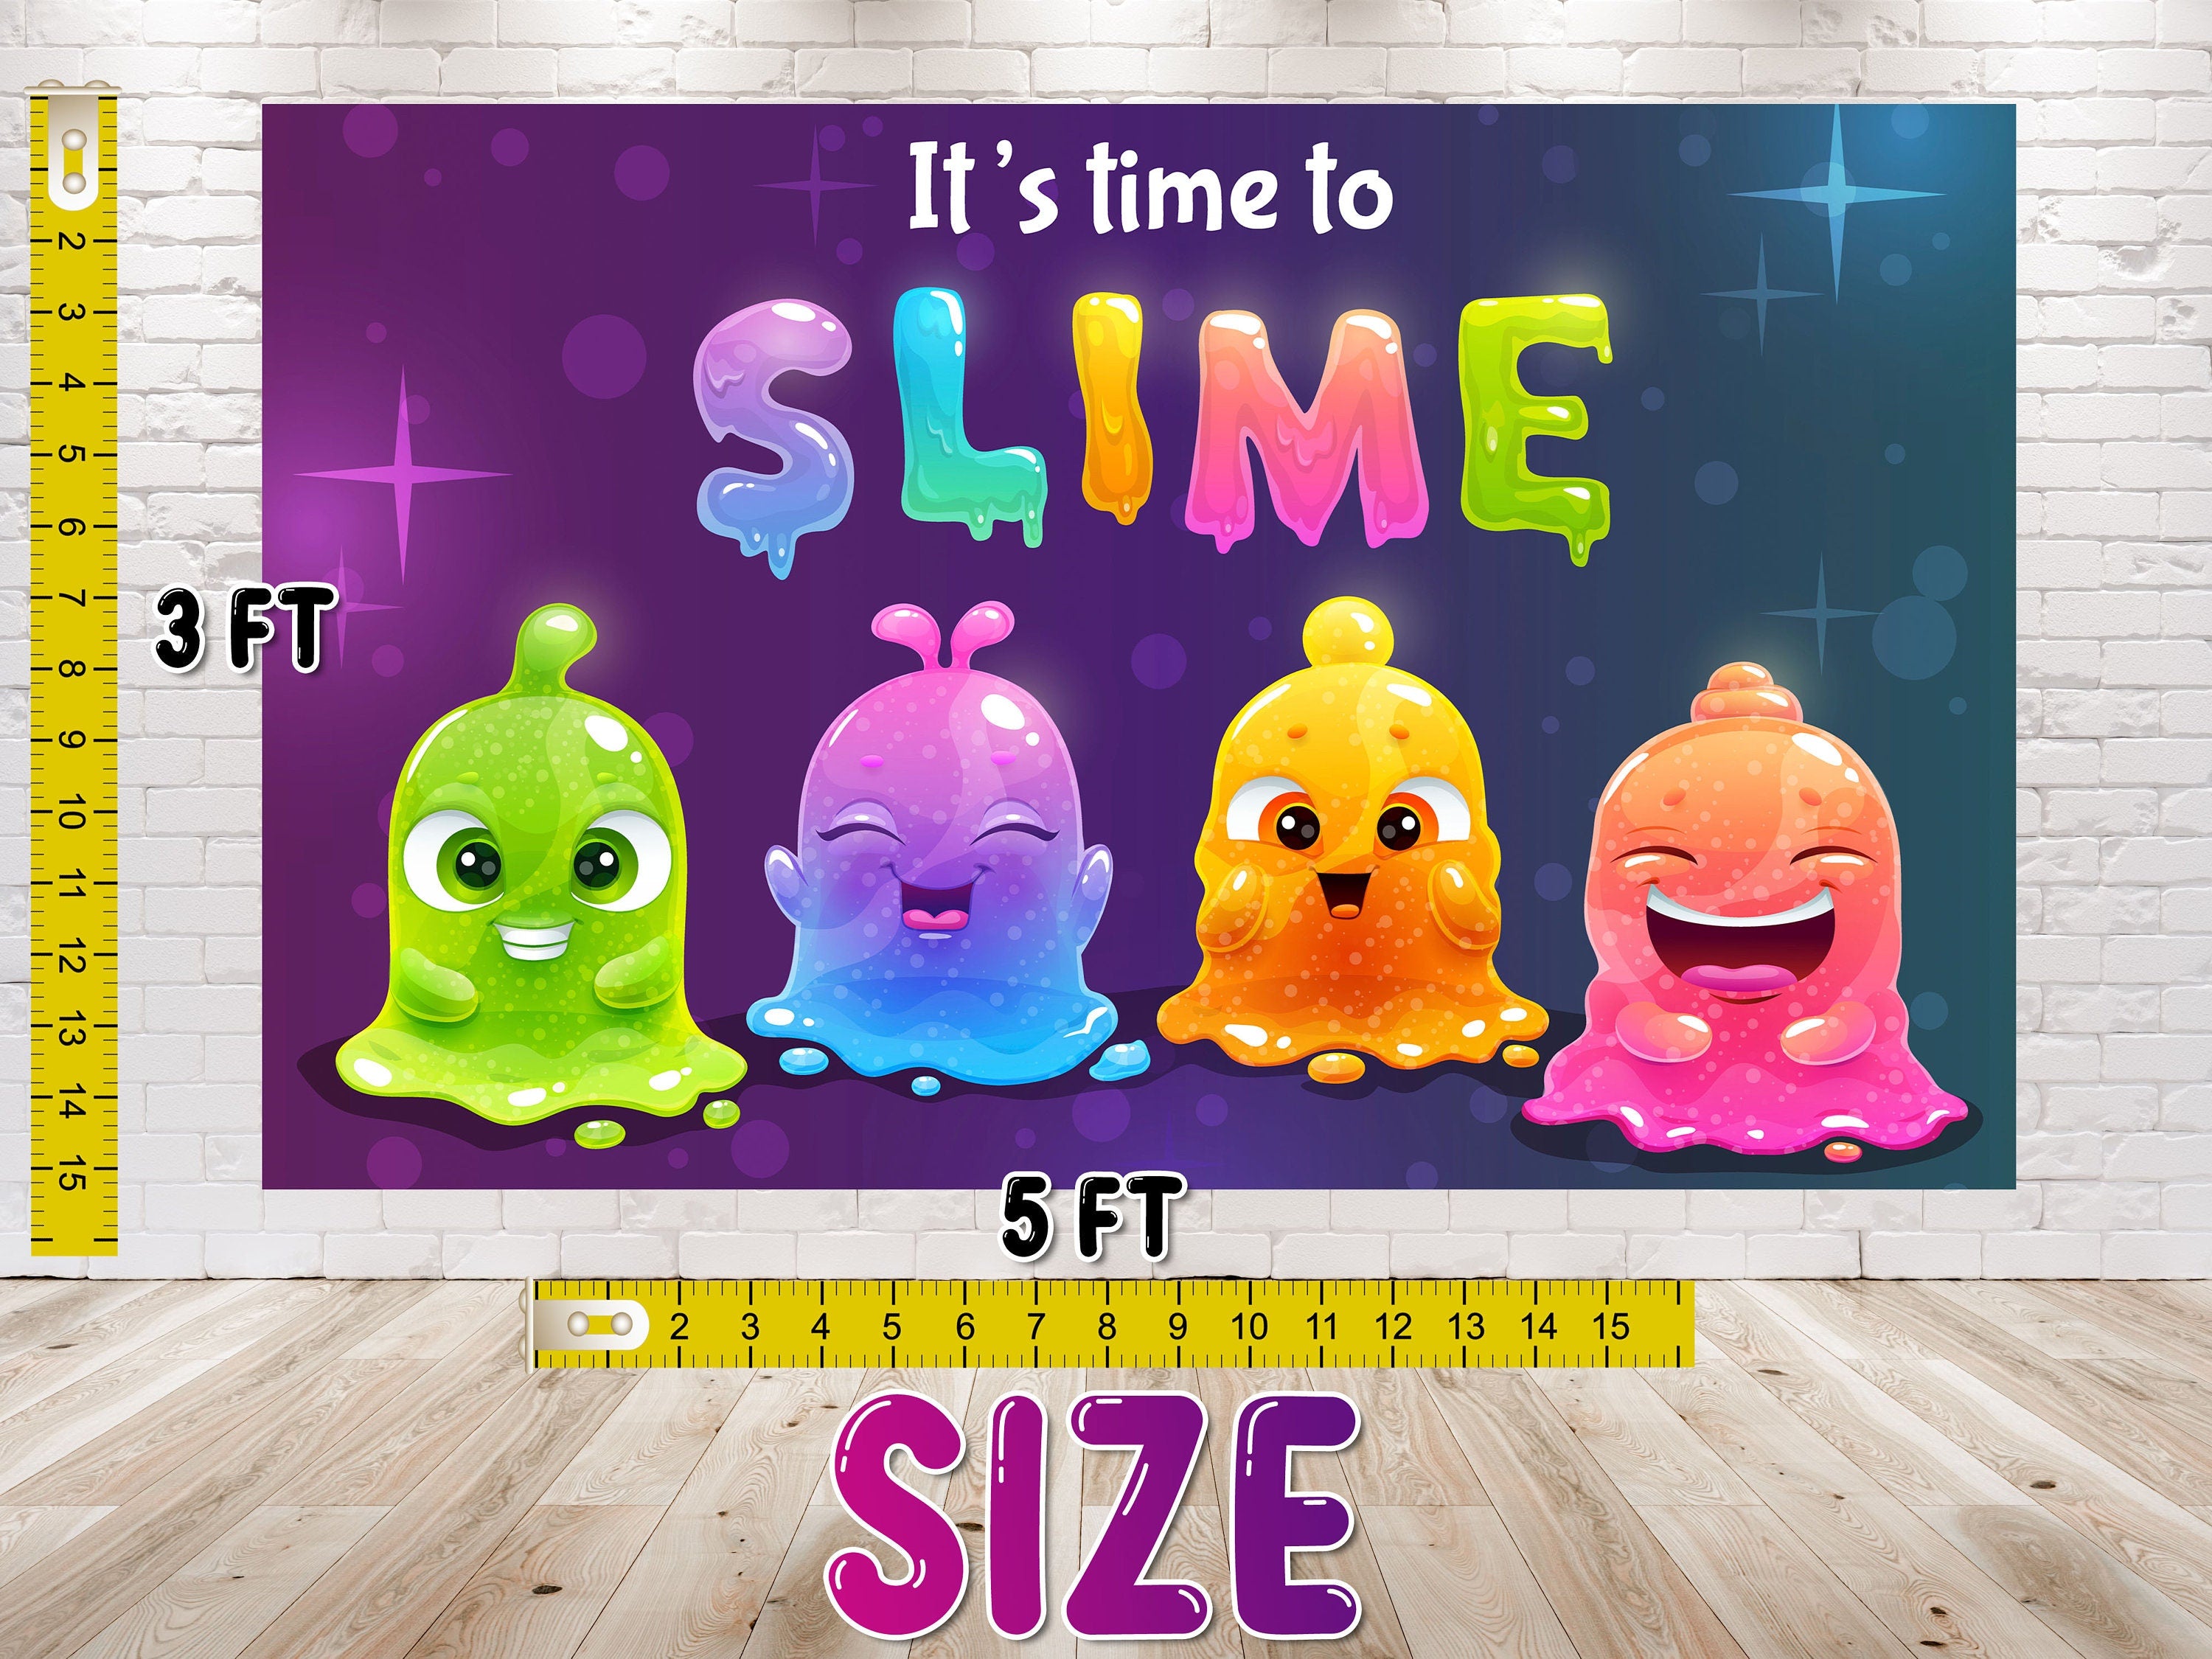 "It's Time to Slime" Baby Shower Backdrop 5x3 FT - Colorful Slime Party Decor